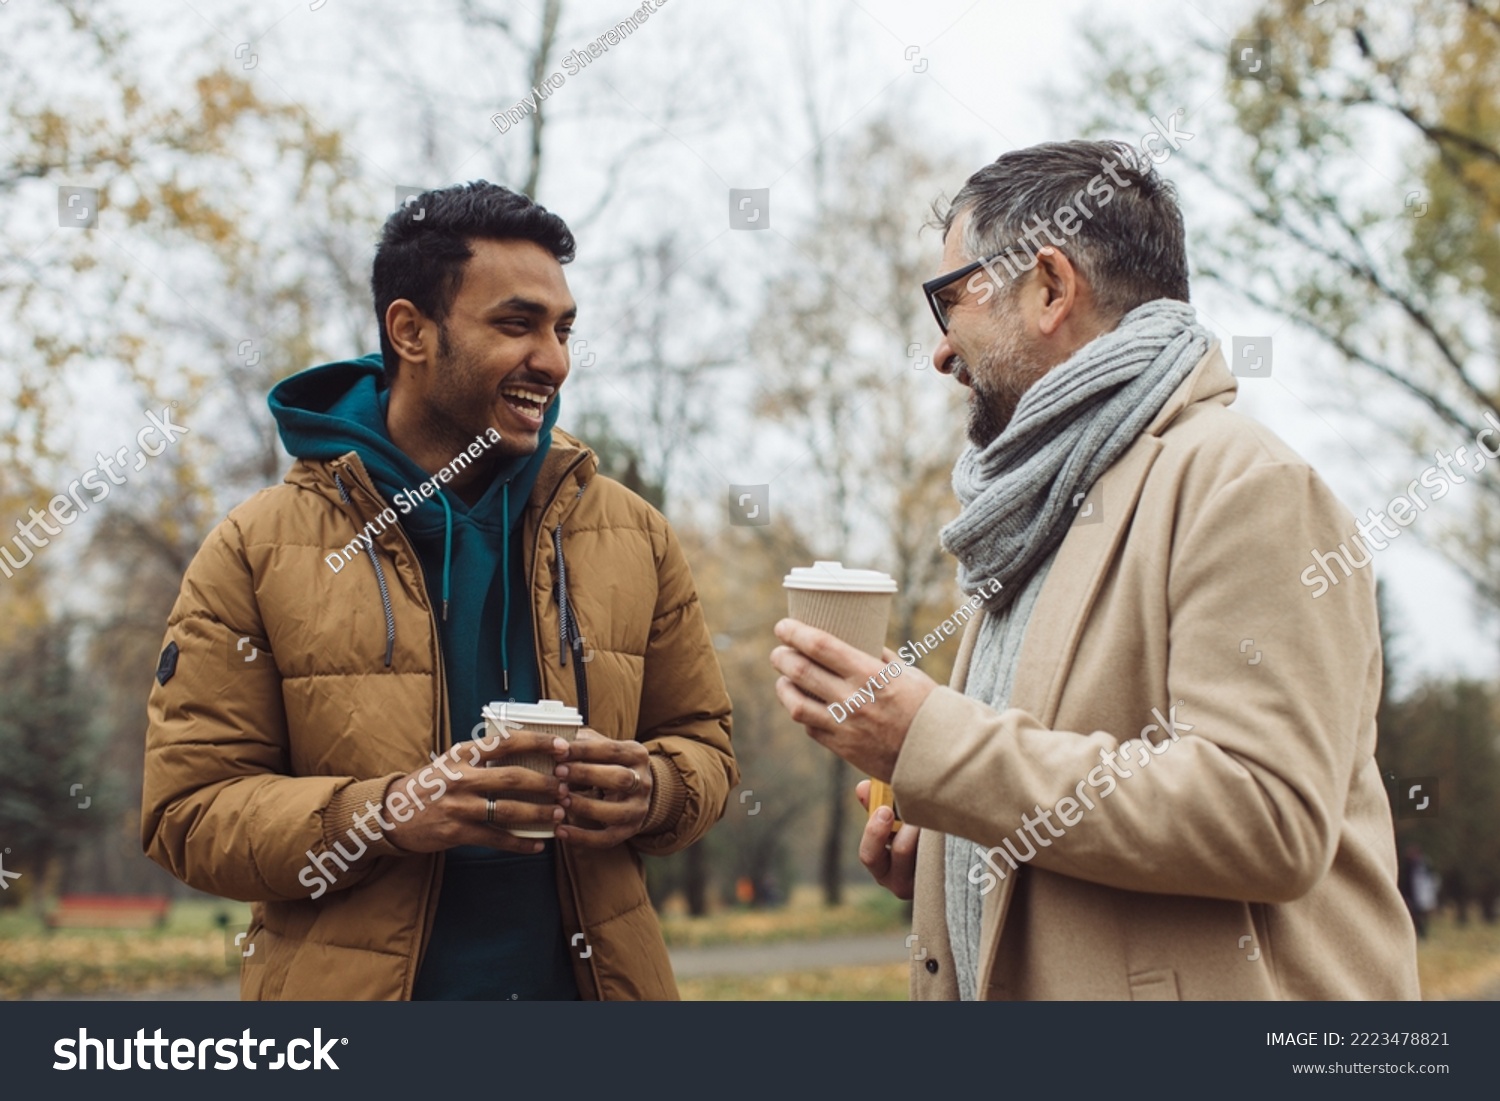 Friends, a senior and a young man walking and talking and drinking coffee together in the autumn park.
 #2223478821